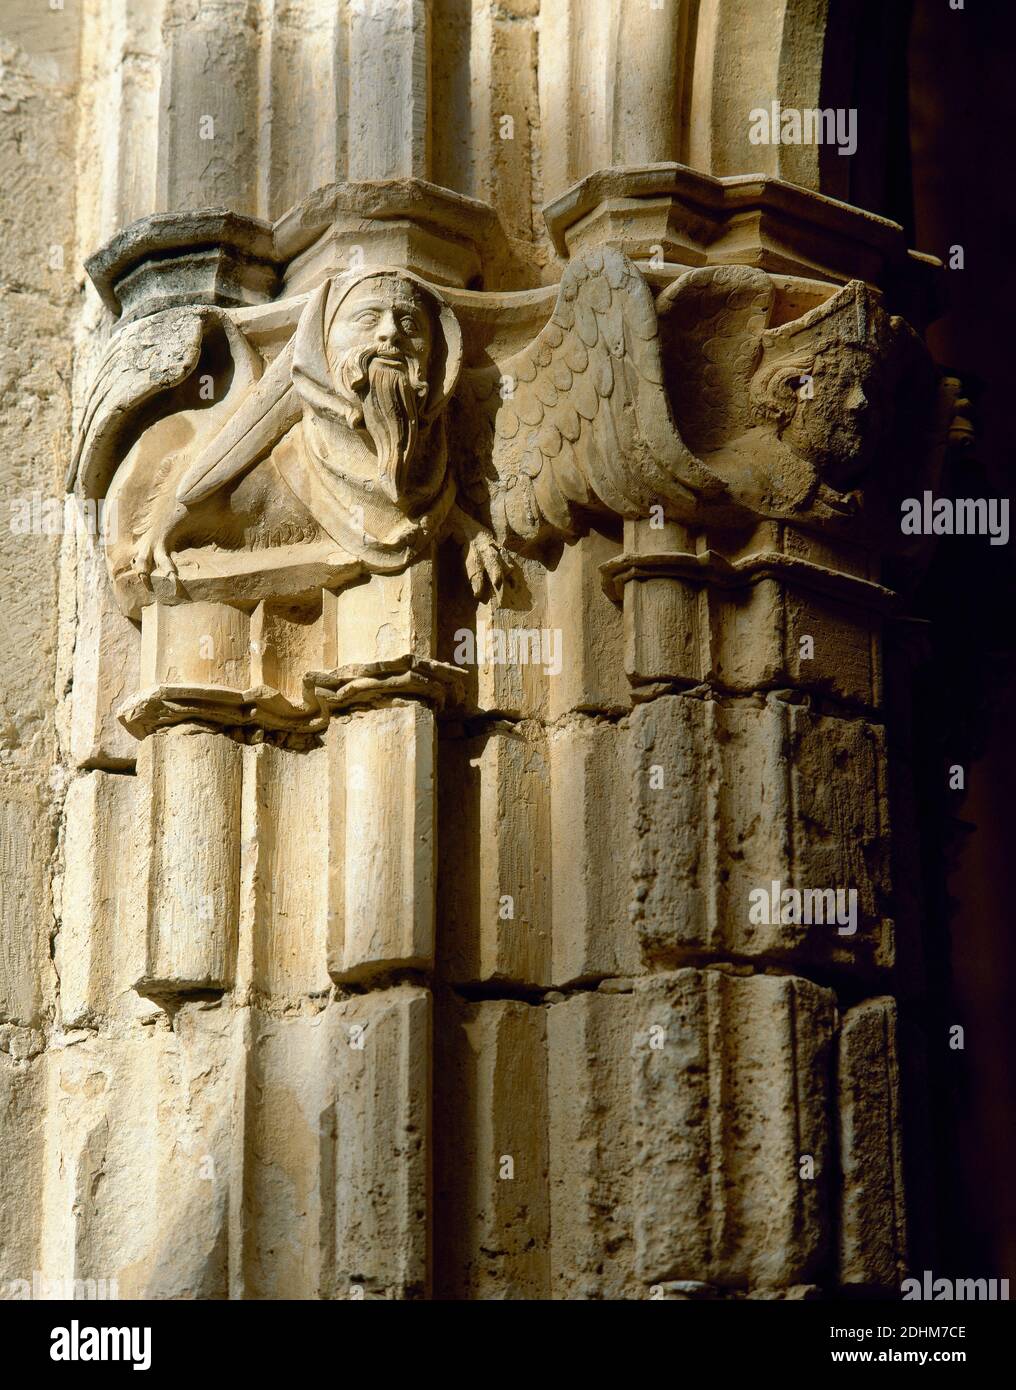 Spain, Catalonia, Tarragona province, Aiguamúrcia. Monastery of Santes Creus. Former Cistercian monastery. Gothic cloister, designed by Reynard of Fonoll, whose work was continued by his disciple Guillem de Seguer. Architectural detail of an ornamented capital with animal and human figures. Stock Photo